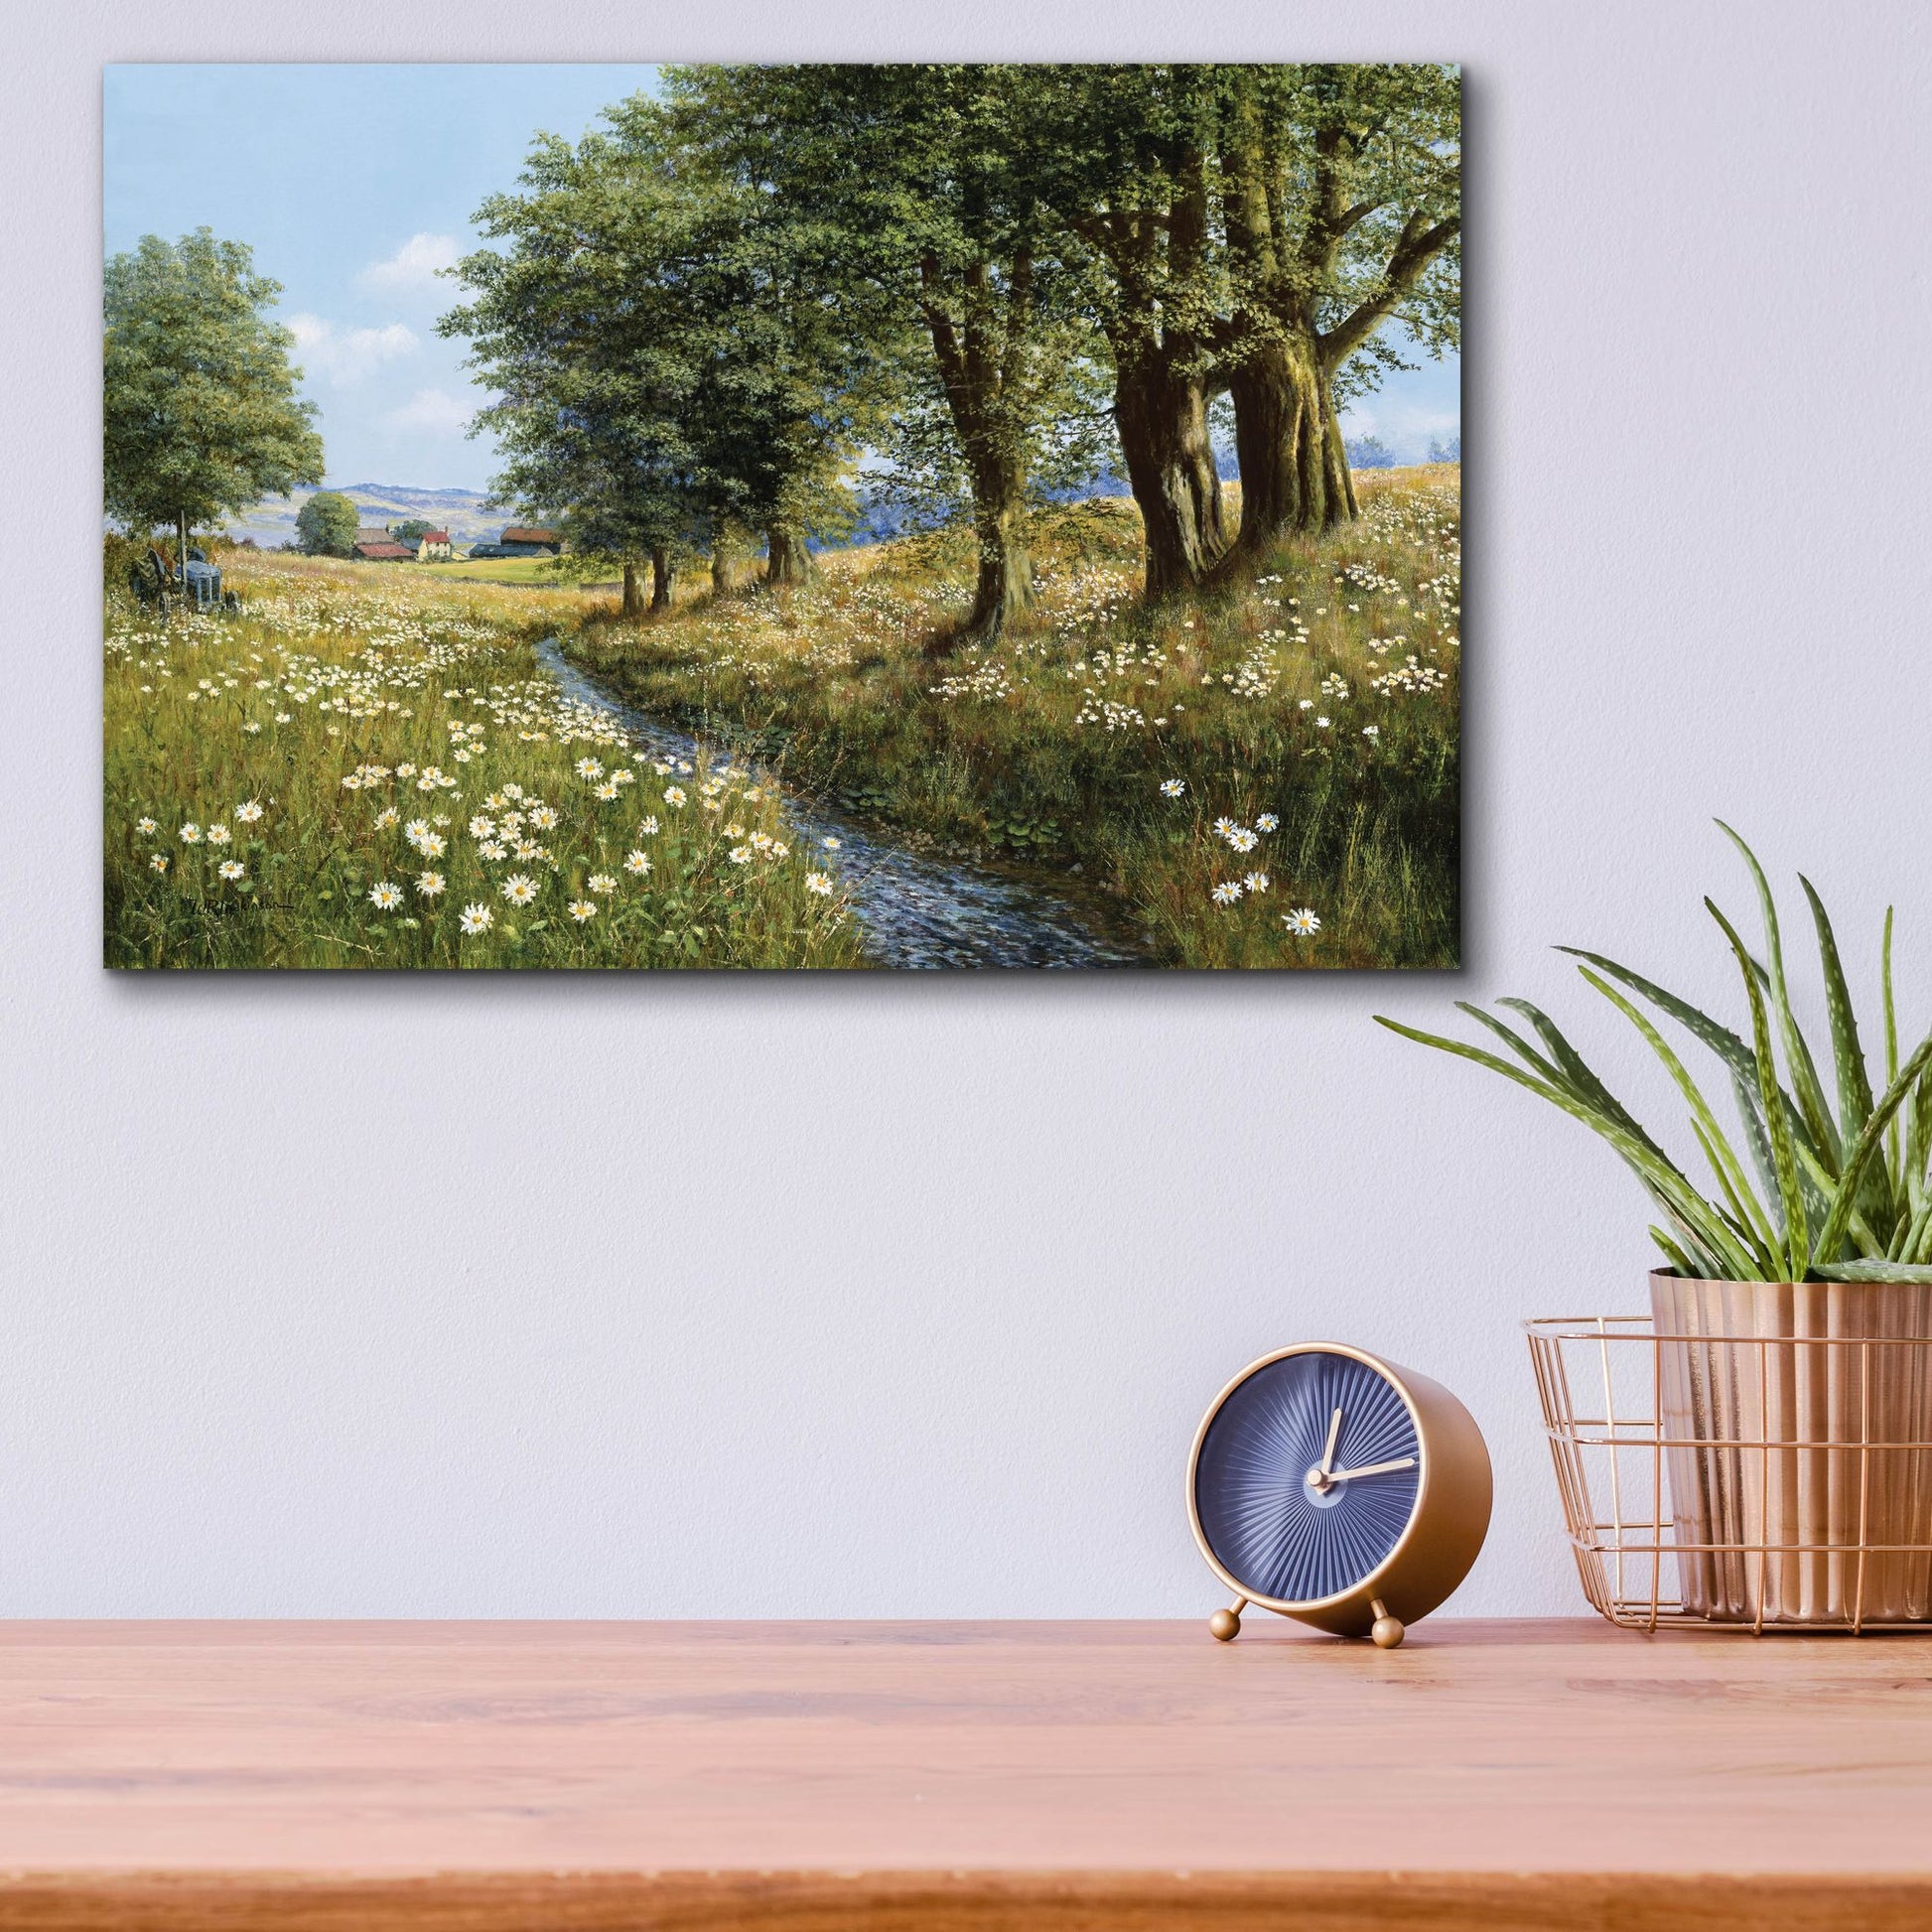 Epic Art 'Beeches And Daisies' by Bill Makinson, Acrylic Glass Wall Art,16x12